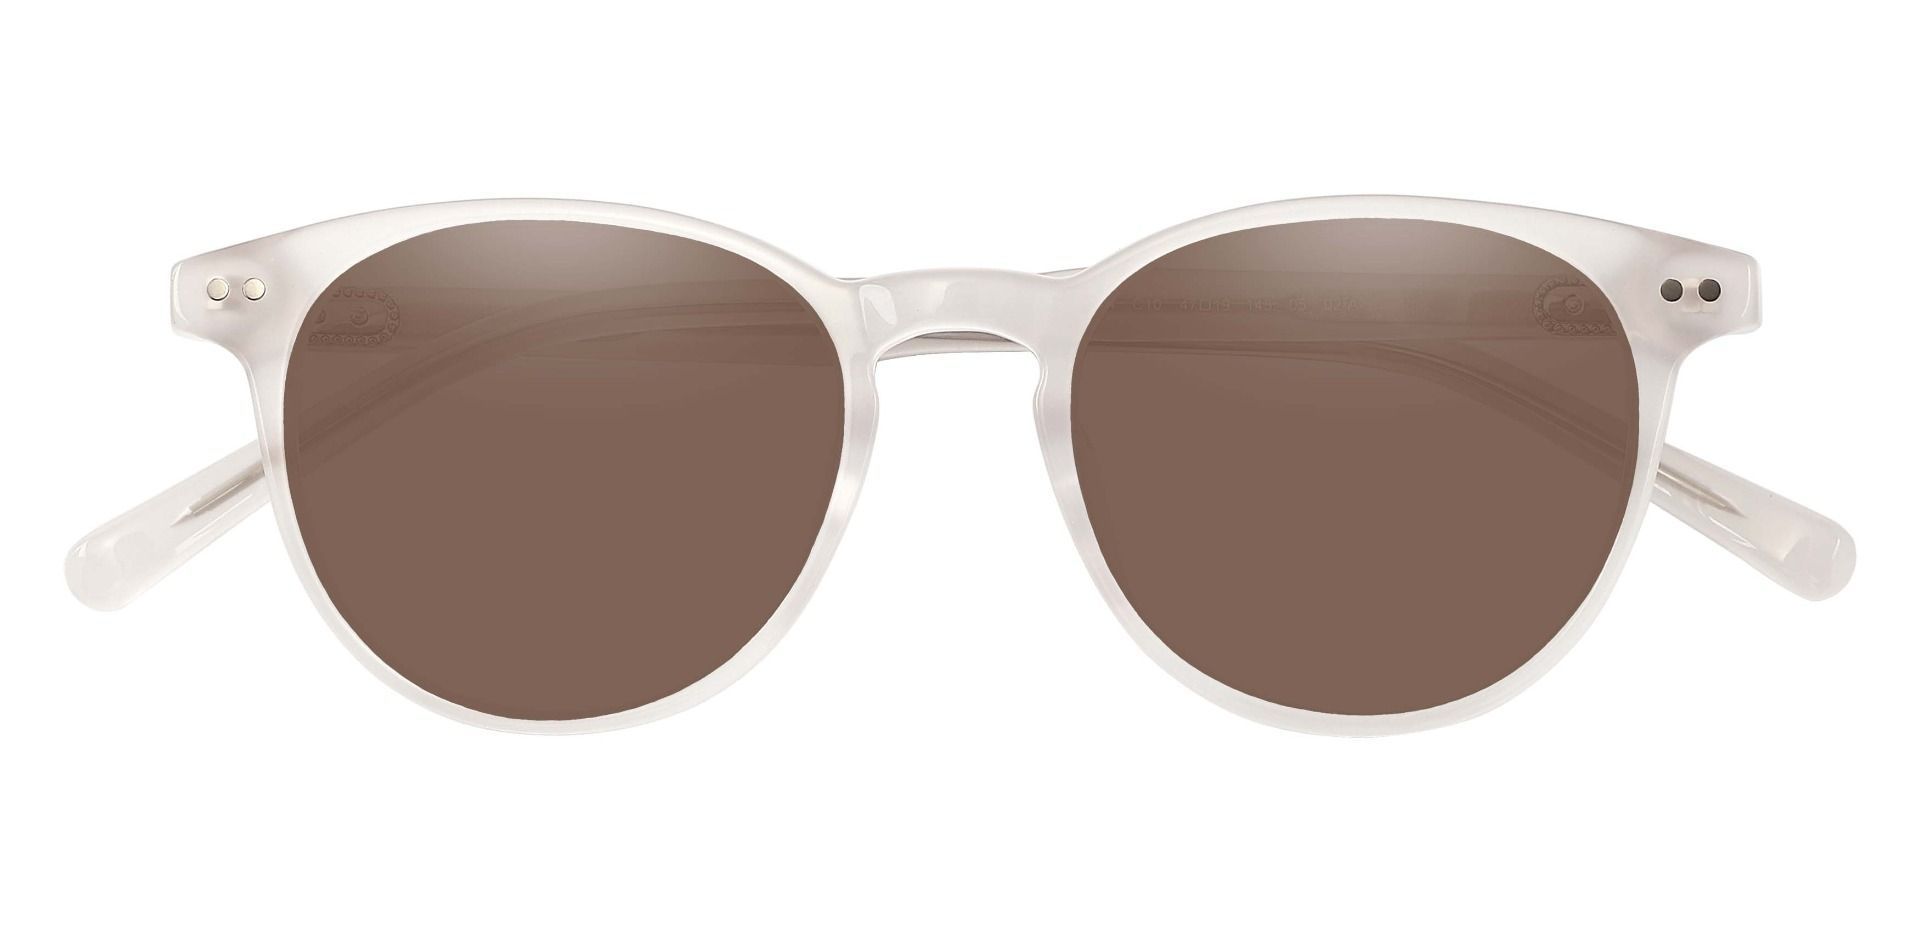 Marianna Oval Non-Rx Sunglasses - White Frame With Brown Lenses